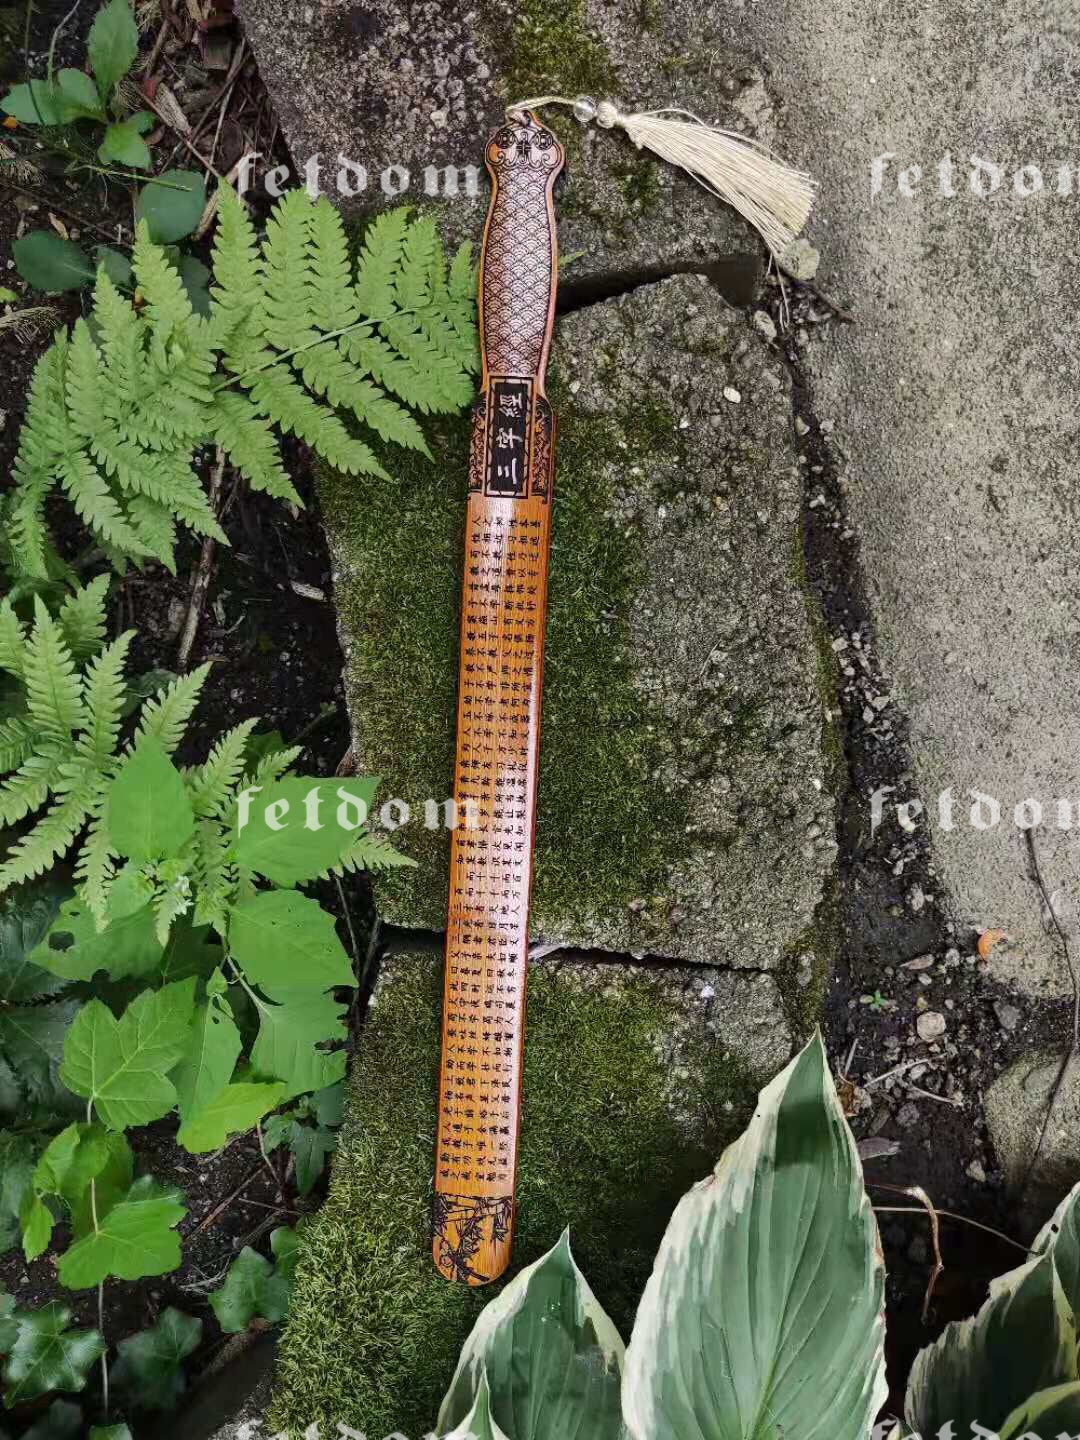 Ships from the USA! Bamboo Ruler Sword Paddle Crafted on both sides with Calligraphy of “Three Character Classic”. Functions as Spanking Ruler, Sword play, Toy for Boys and Girls